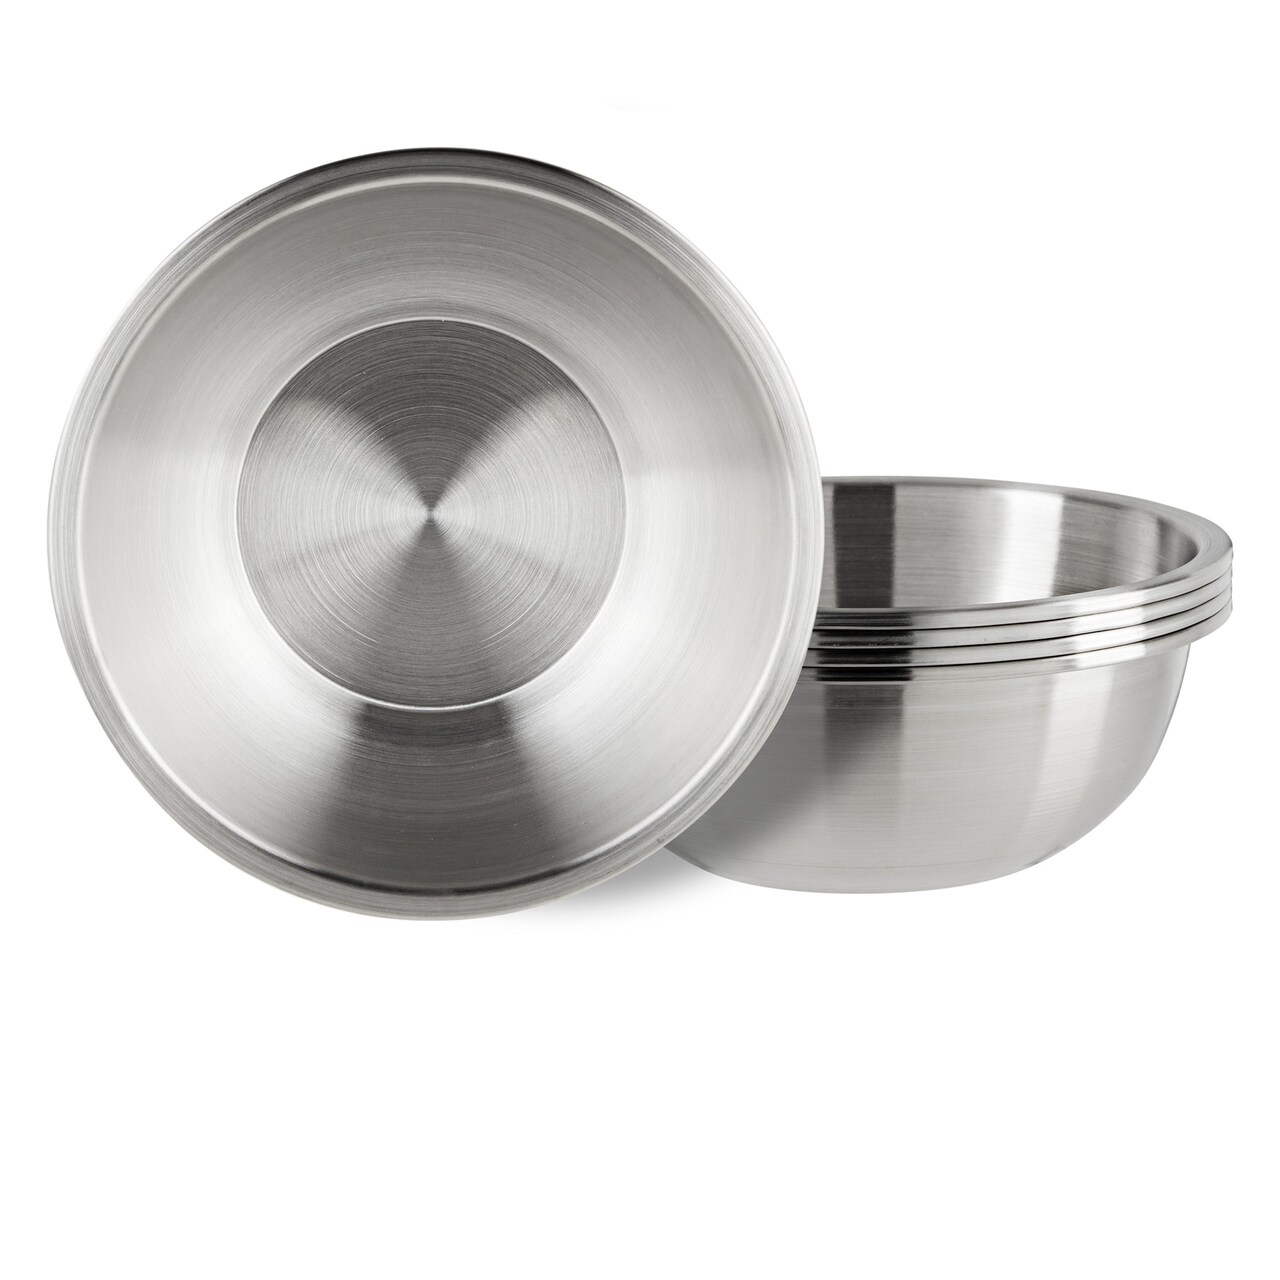 1.2 Qt Stainless Steel Mixing Bowls for Kitchen, Baking, Cooking